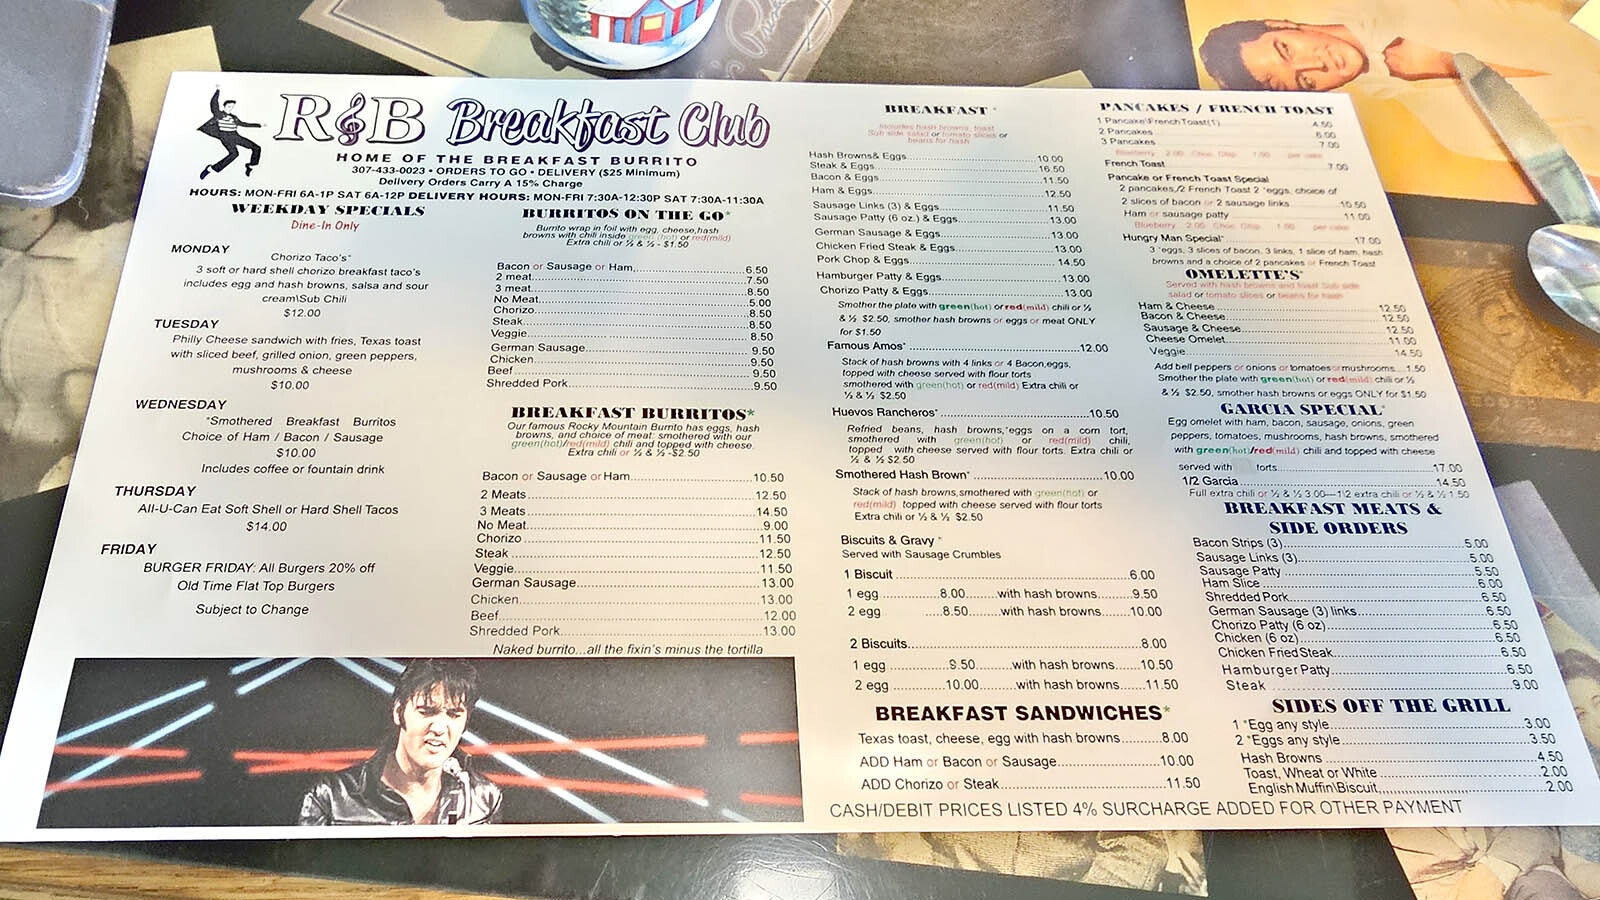 The menu at R&B Breakfast Club features Elvis-sized portions of hearty food, along with pictures of the King himself.